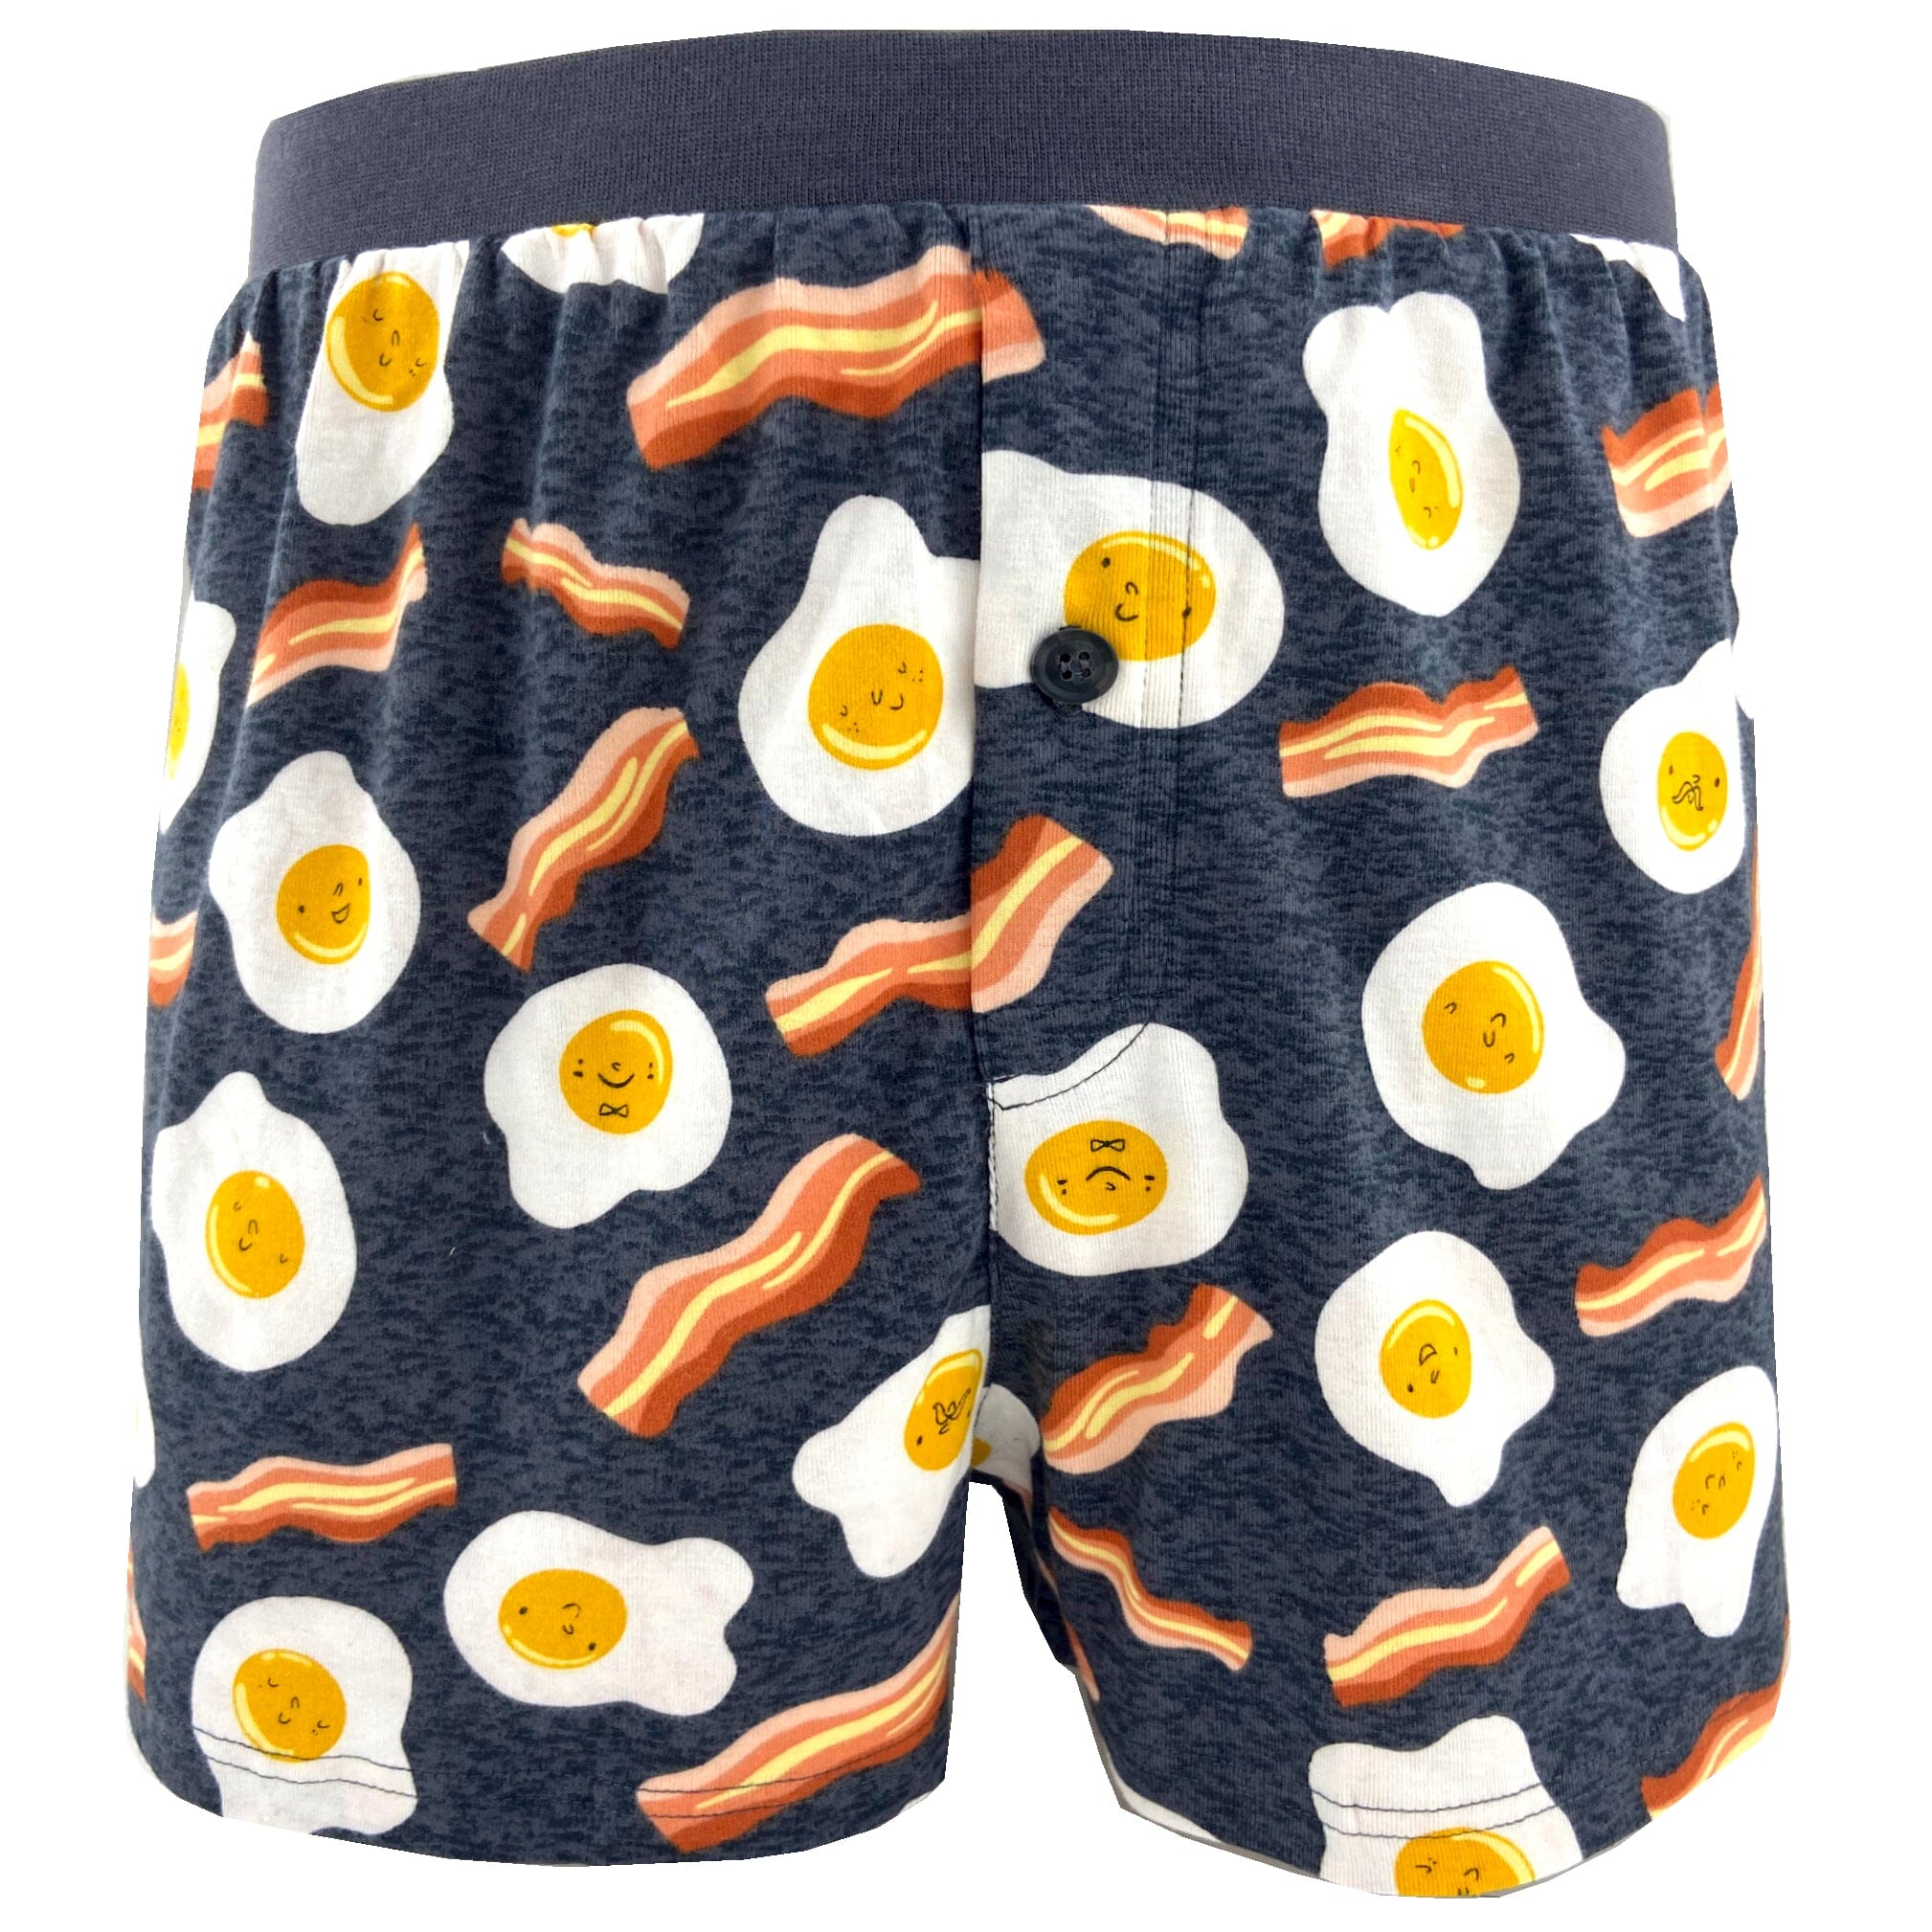 Colorful All-Over Print Boxer Shorts For Men. Mens Boxers With Style